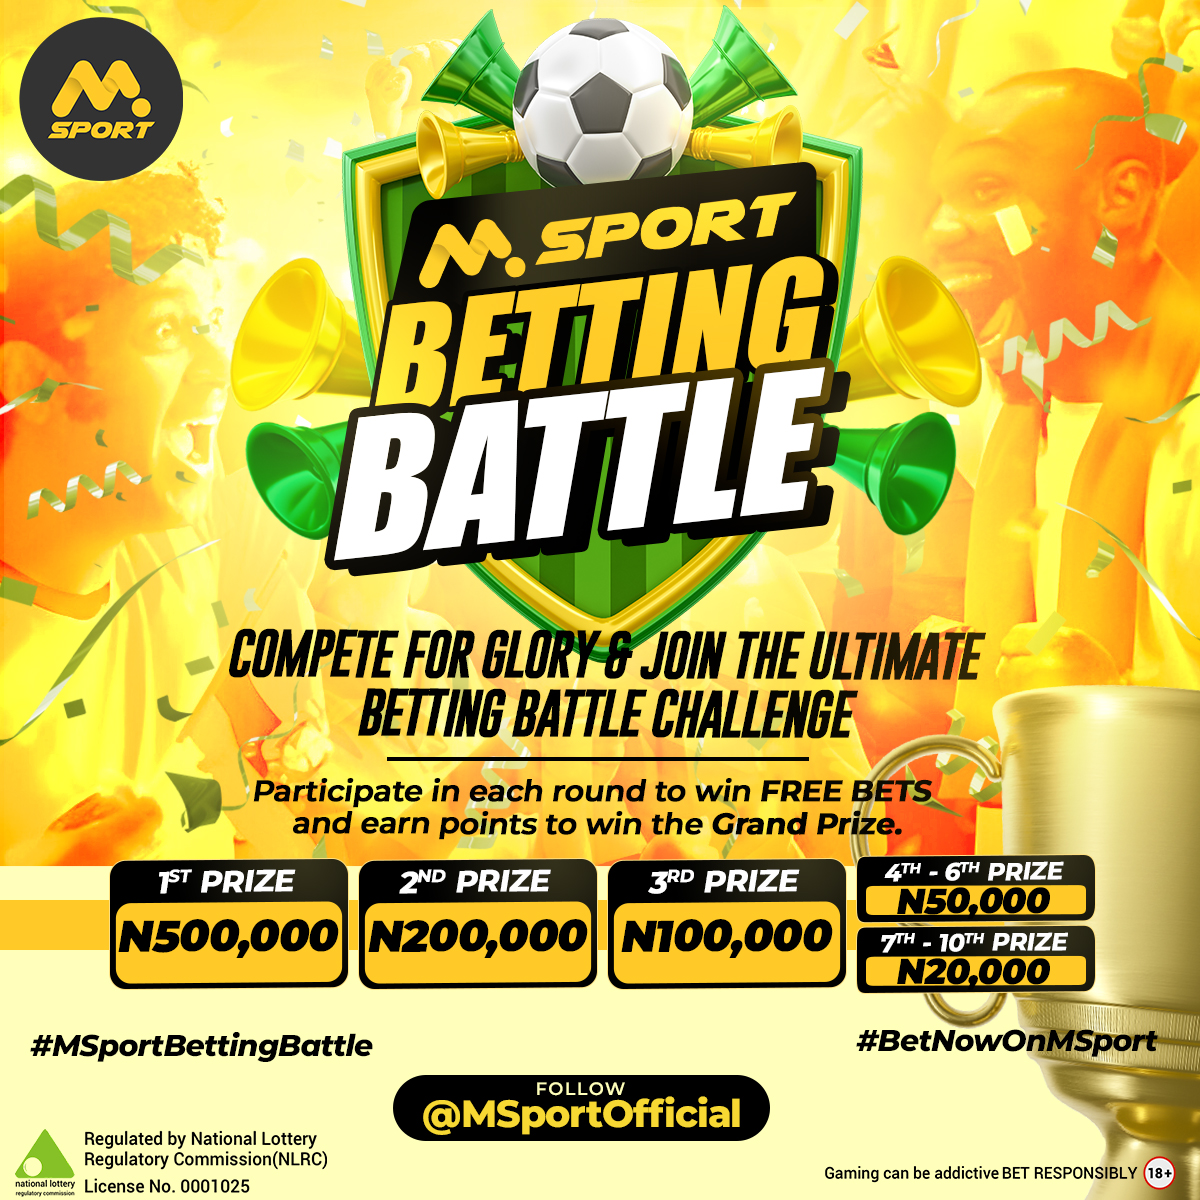 Hey MSport Fam! 🎉 Big shoutout to everyone who rocked the #MSportBettingBattle! Just like day turns to night, our epic battle has come to an end. We’ve seen some fierce competition, and now it's time to unveil our champions! 🥁 Drumrolls 🥁, please meet our winners: 🥇 1st